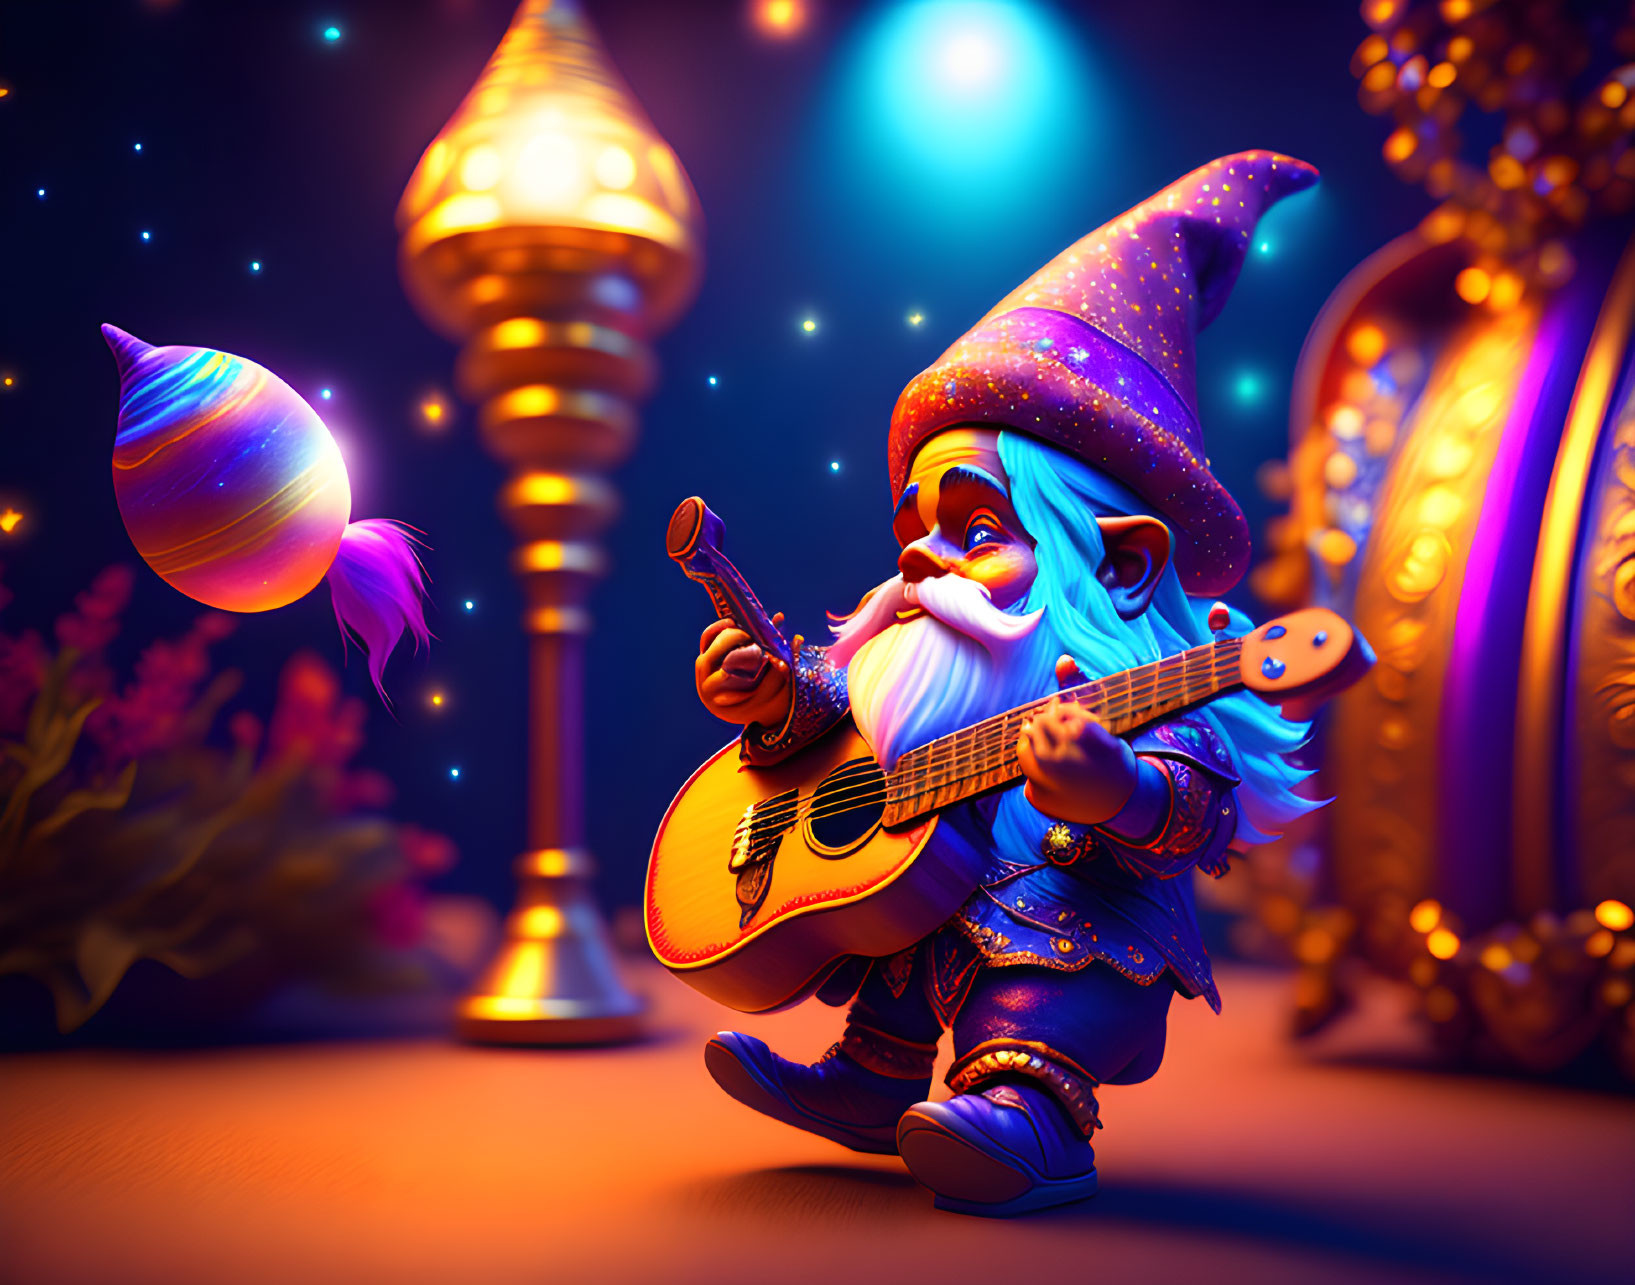 Whimsical 3D illustration of a gnome playing guitar in magical setting